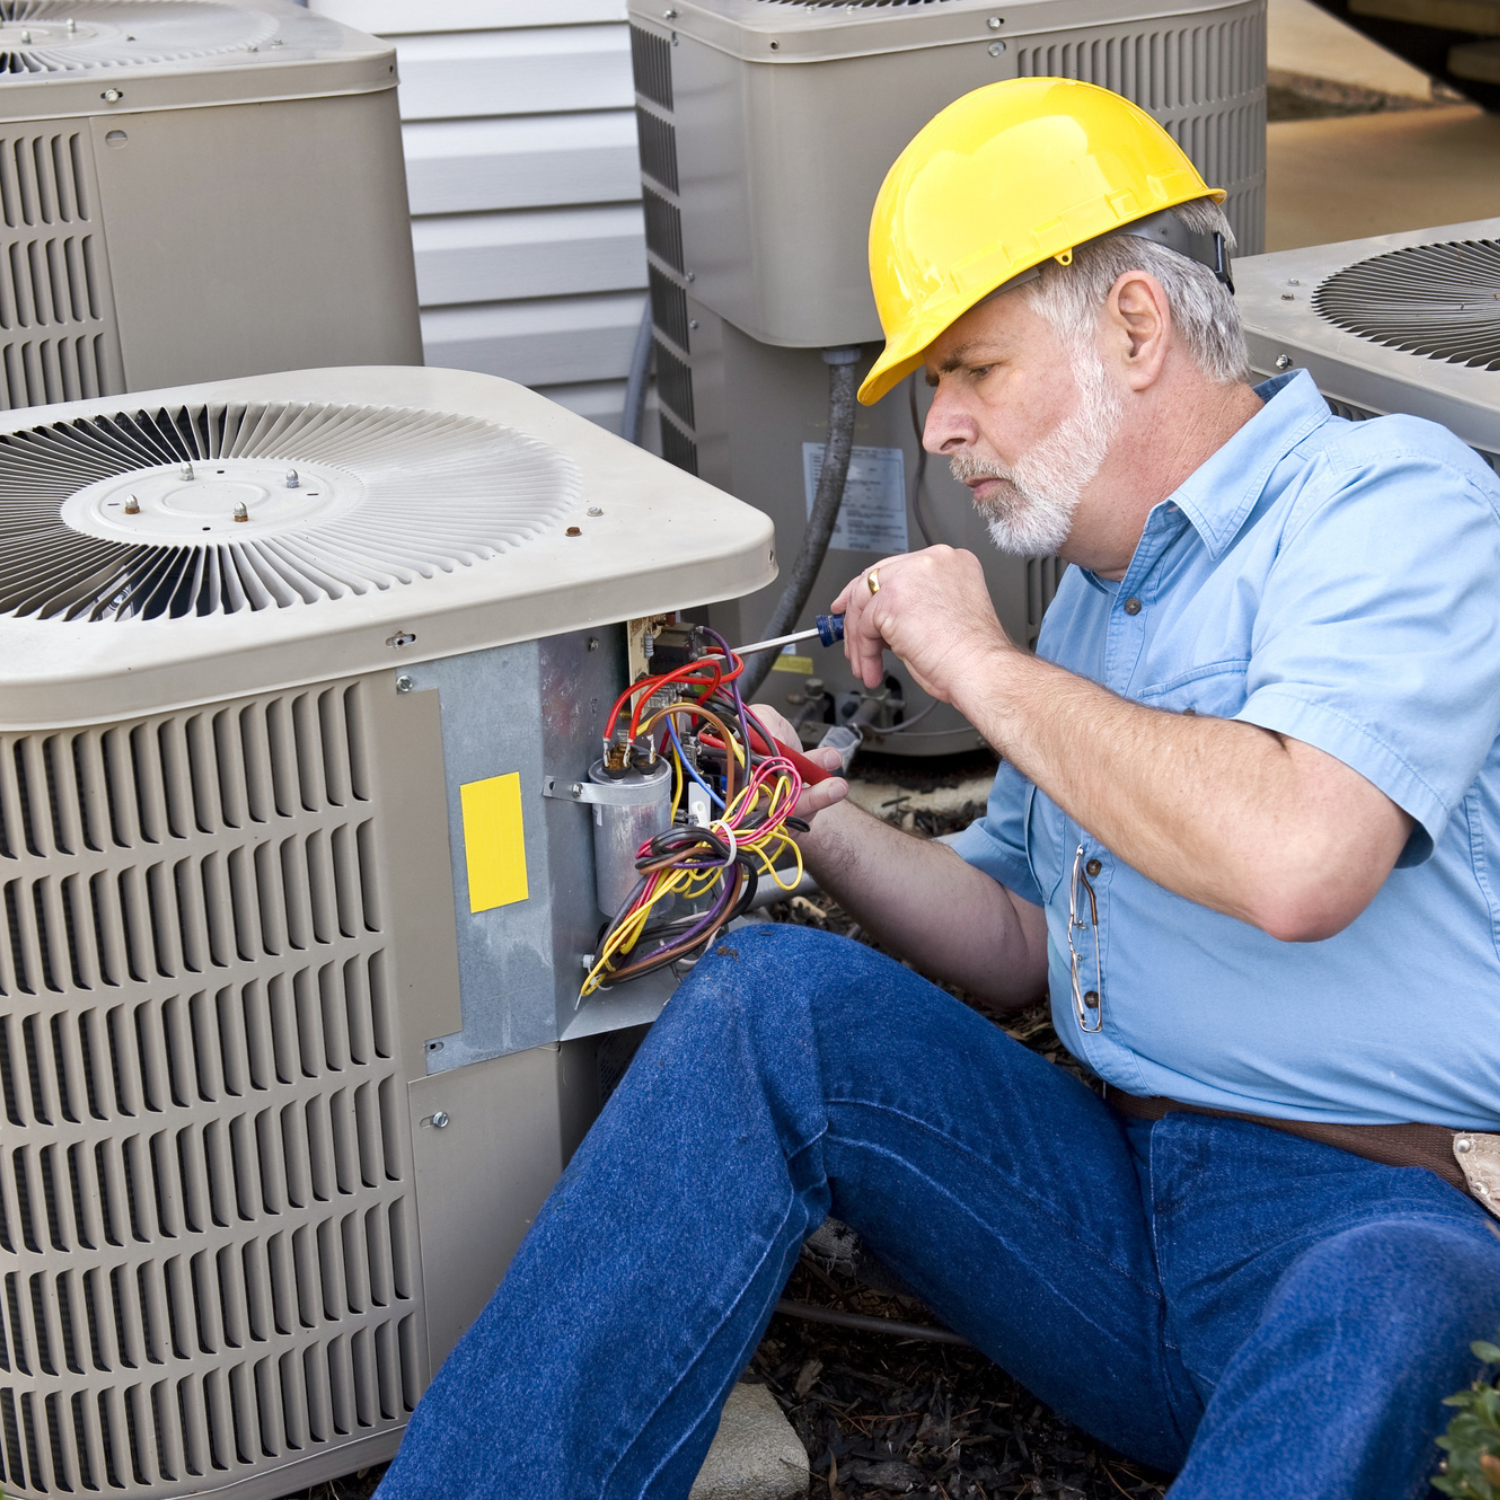 How to Maintain the HVAC in Rental Homes: Tips, Tricks, and Best Practices